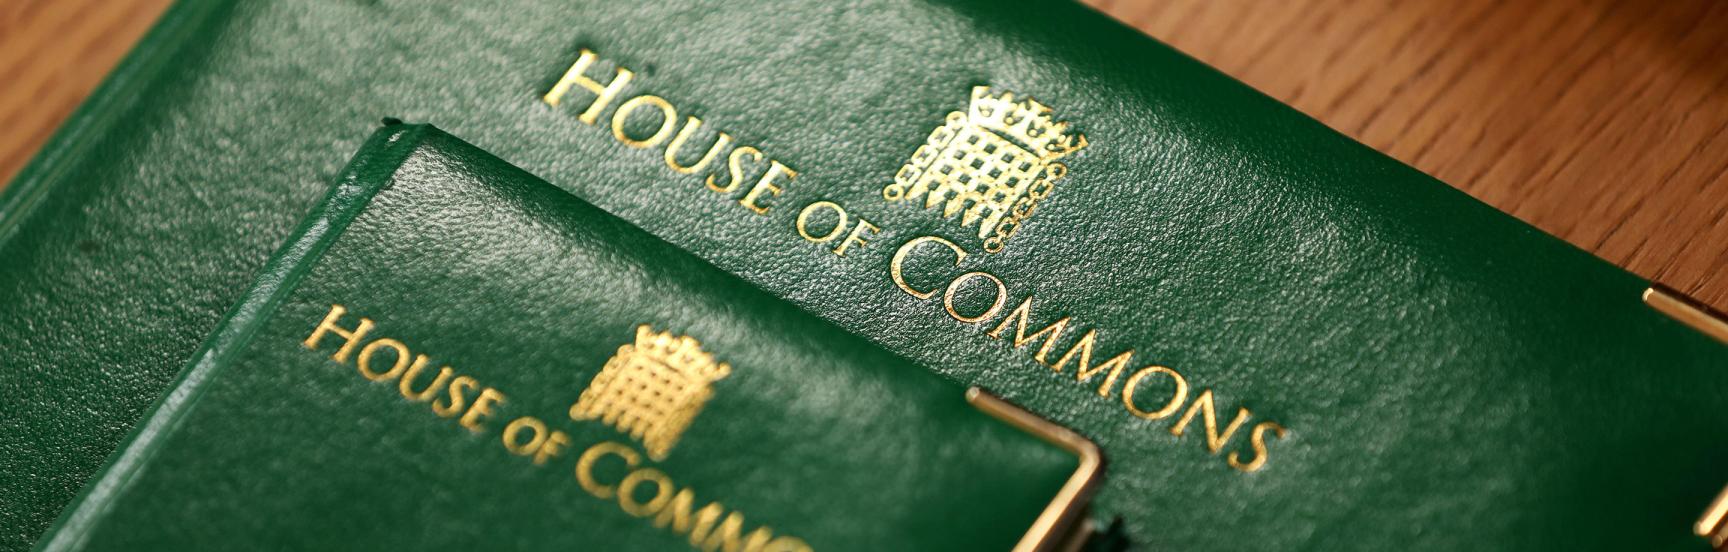 House of Commons green files